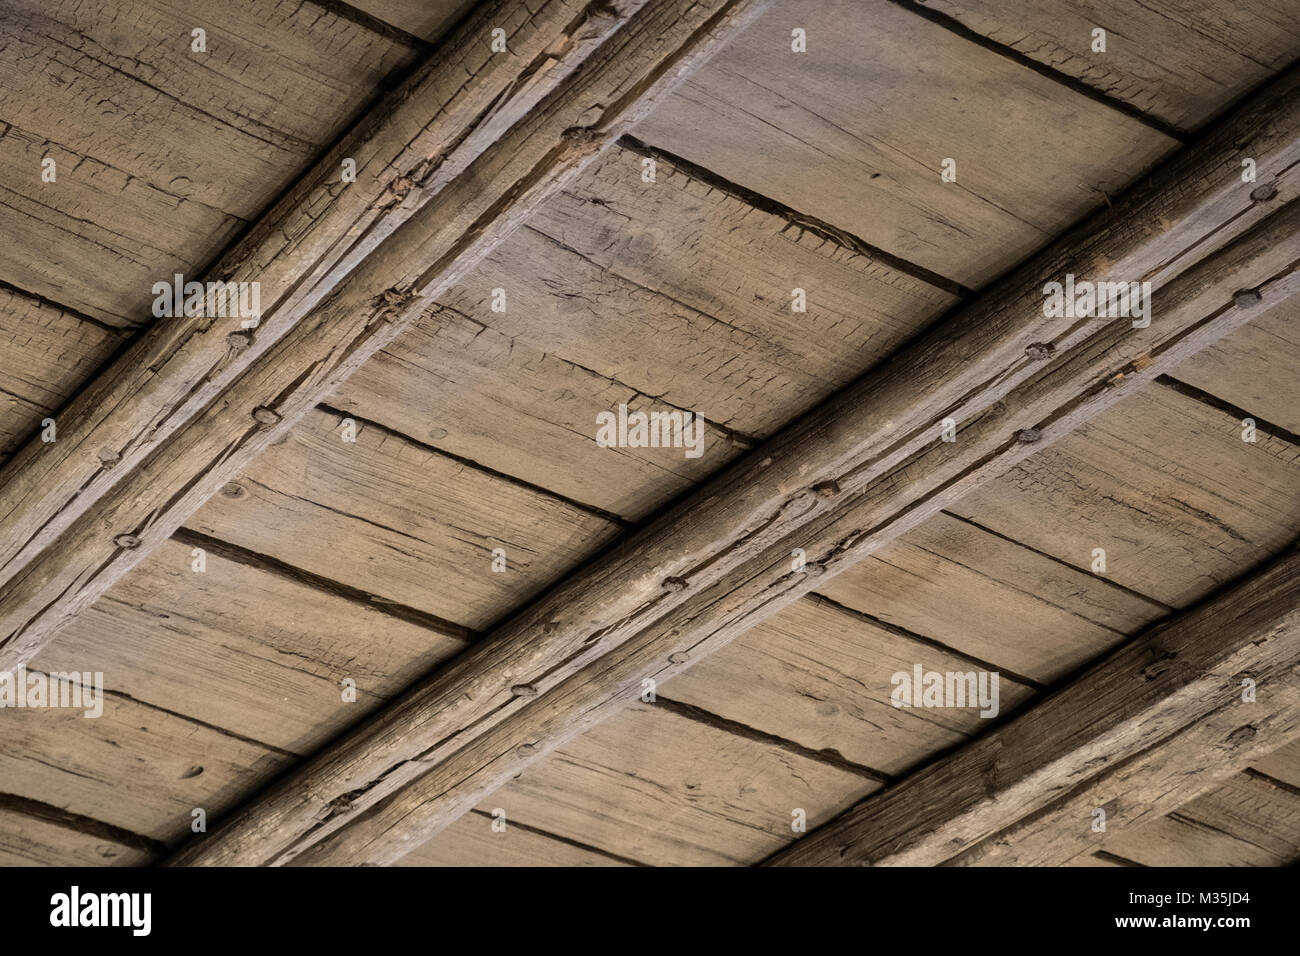 wooden ceiling, old wood roof construction - interior Stock Photo